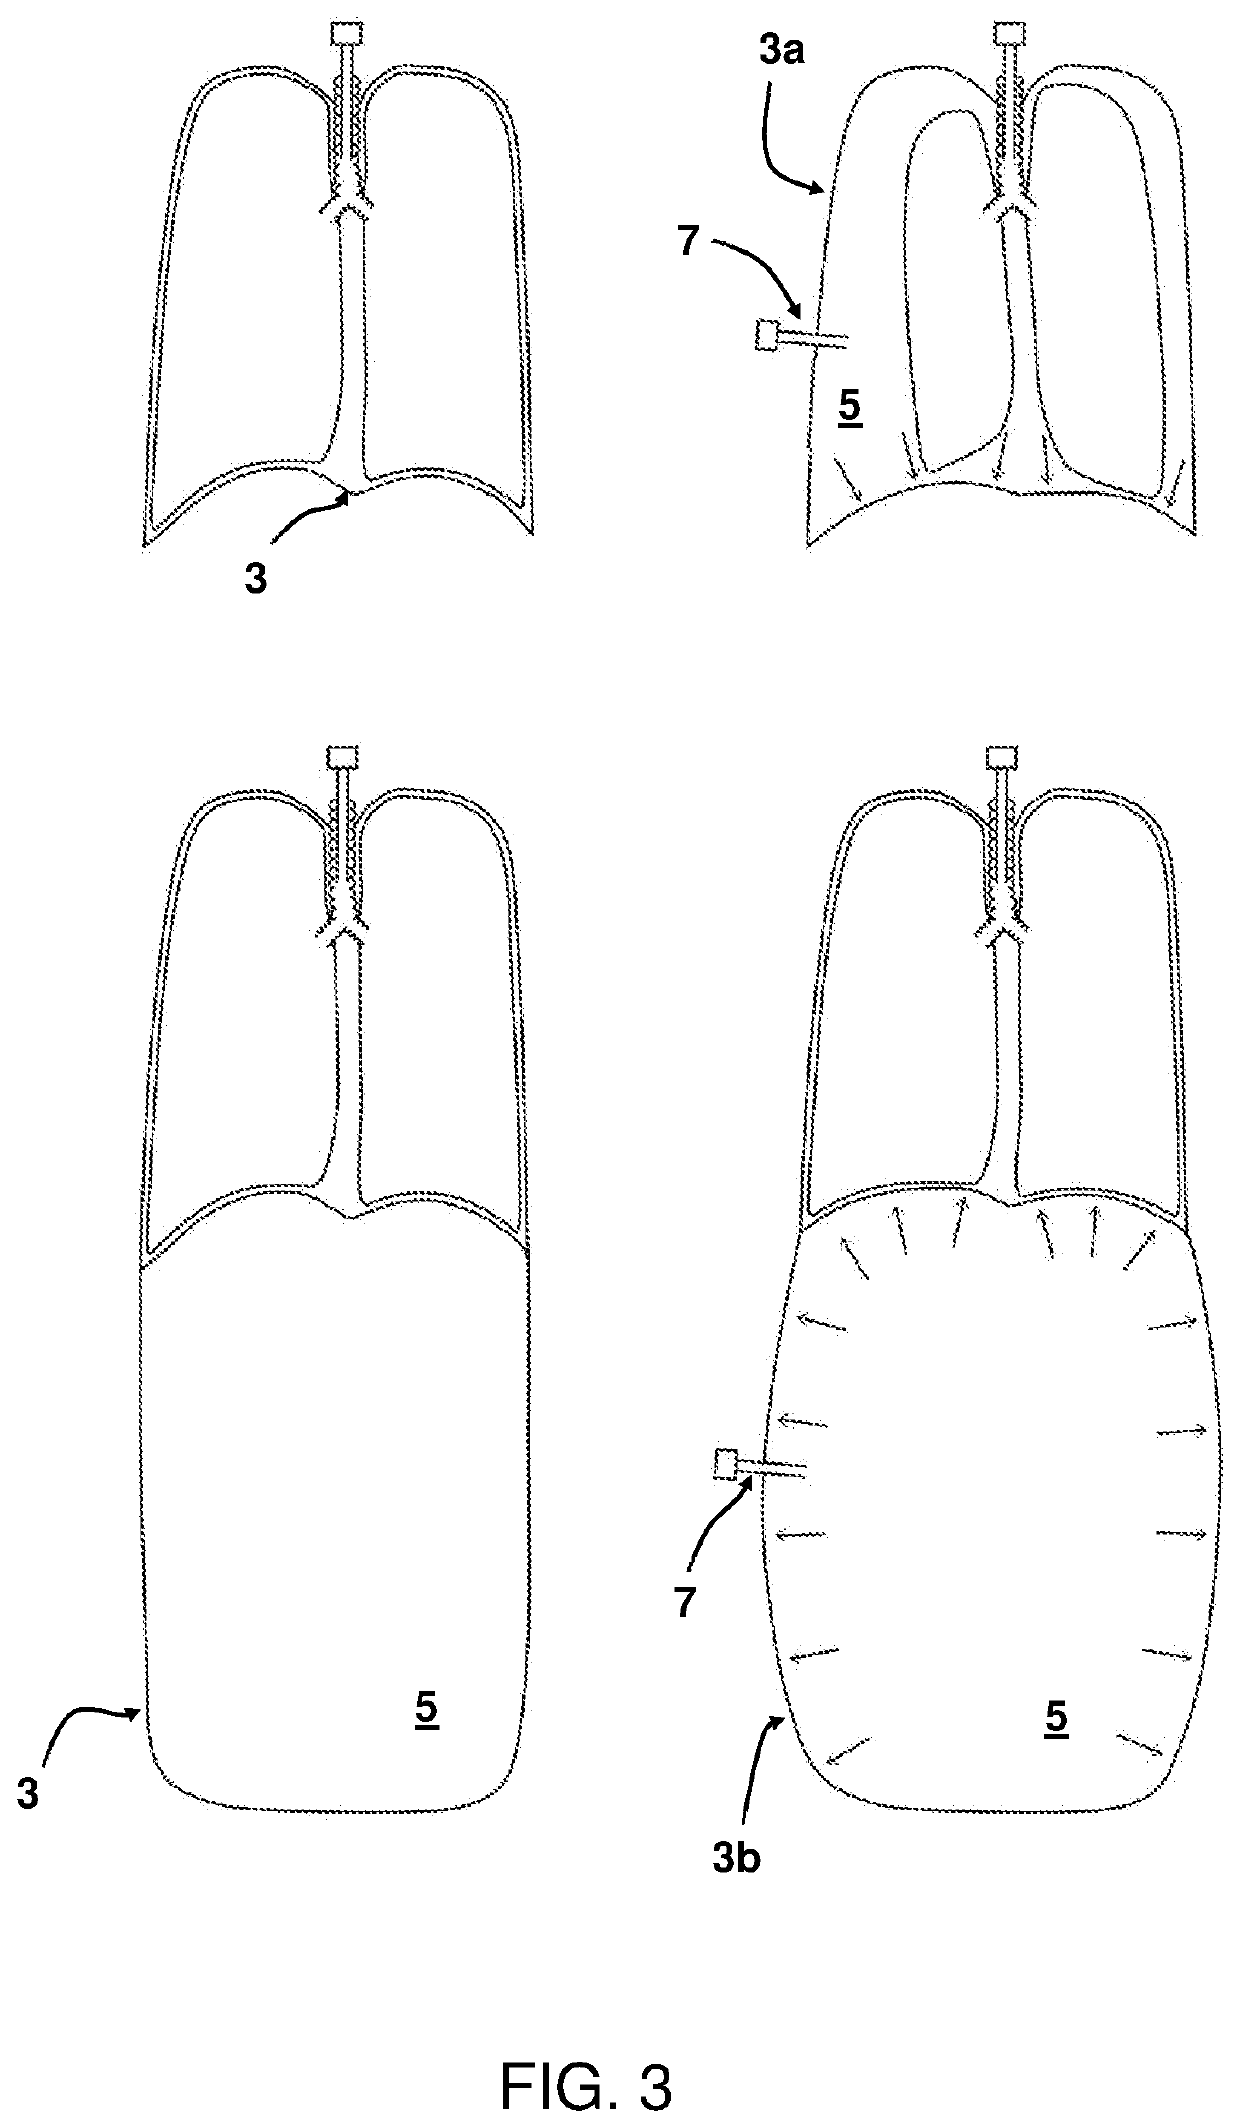 An insufflator for exposing structures within an internal body cavity